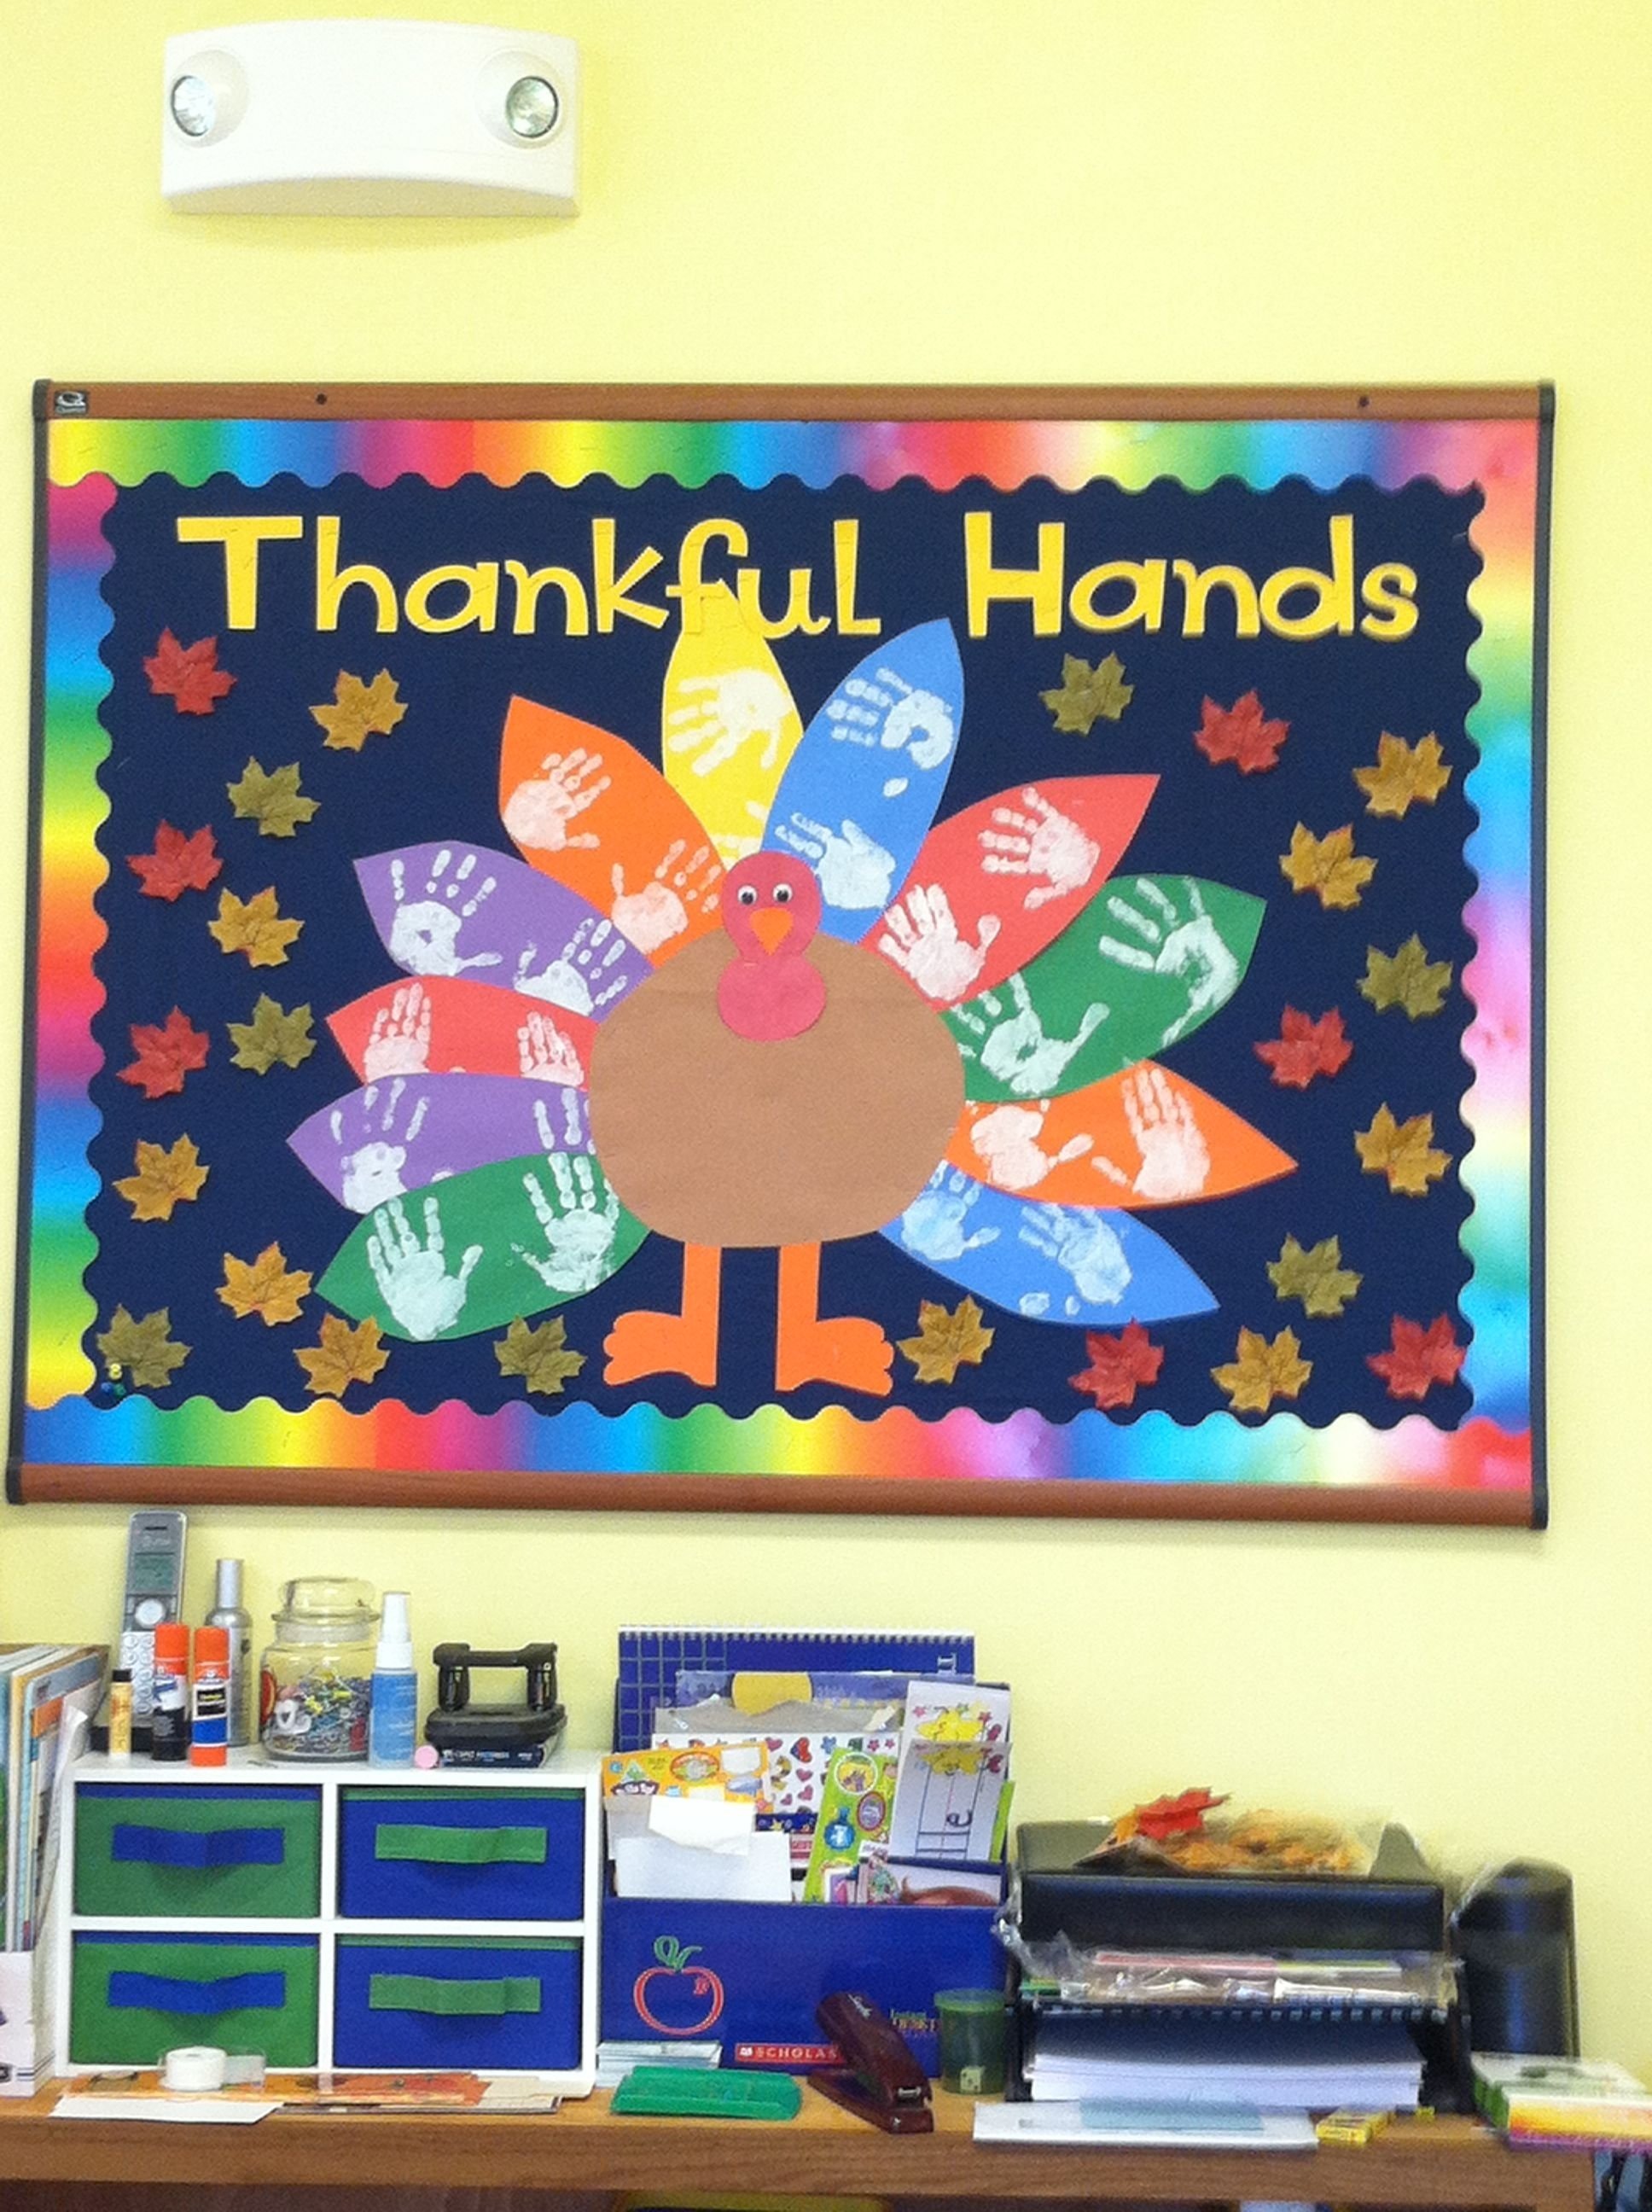 10 Attractive Thanksgiving Bulletin Board Ideas For Preschool thanksgiving bulletin board cms thankful notes on tail feathers 4 2022